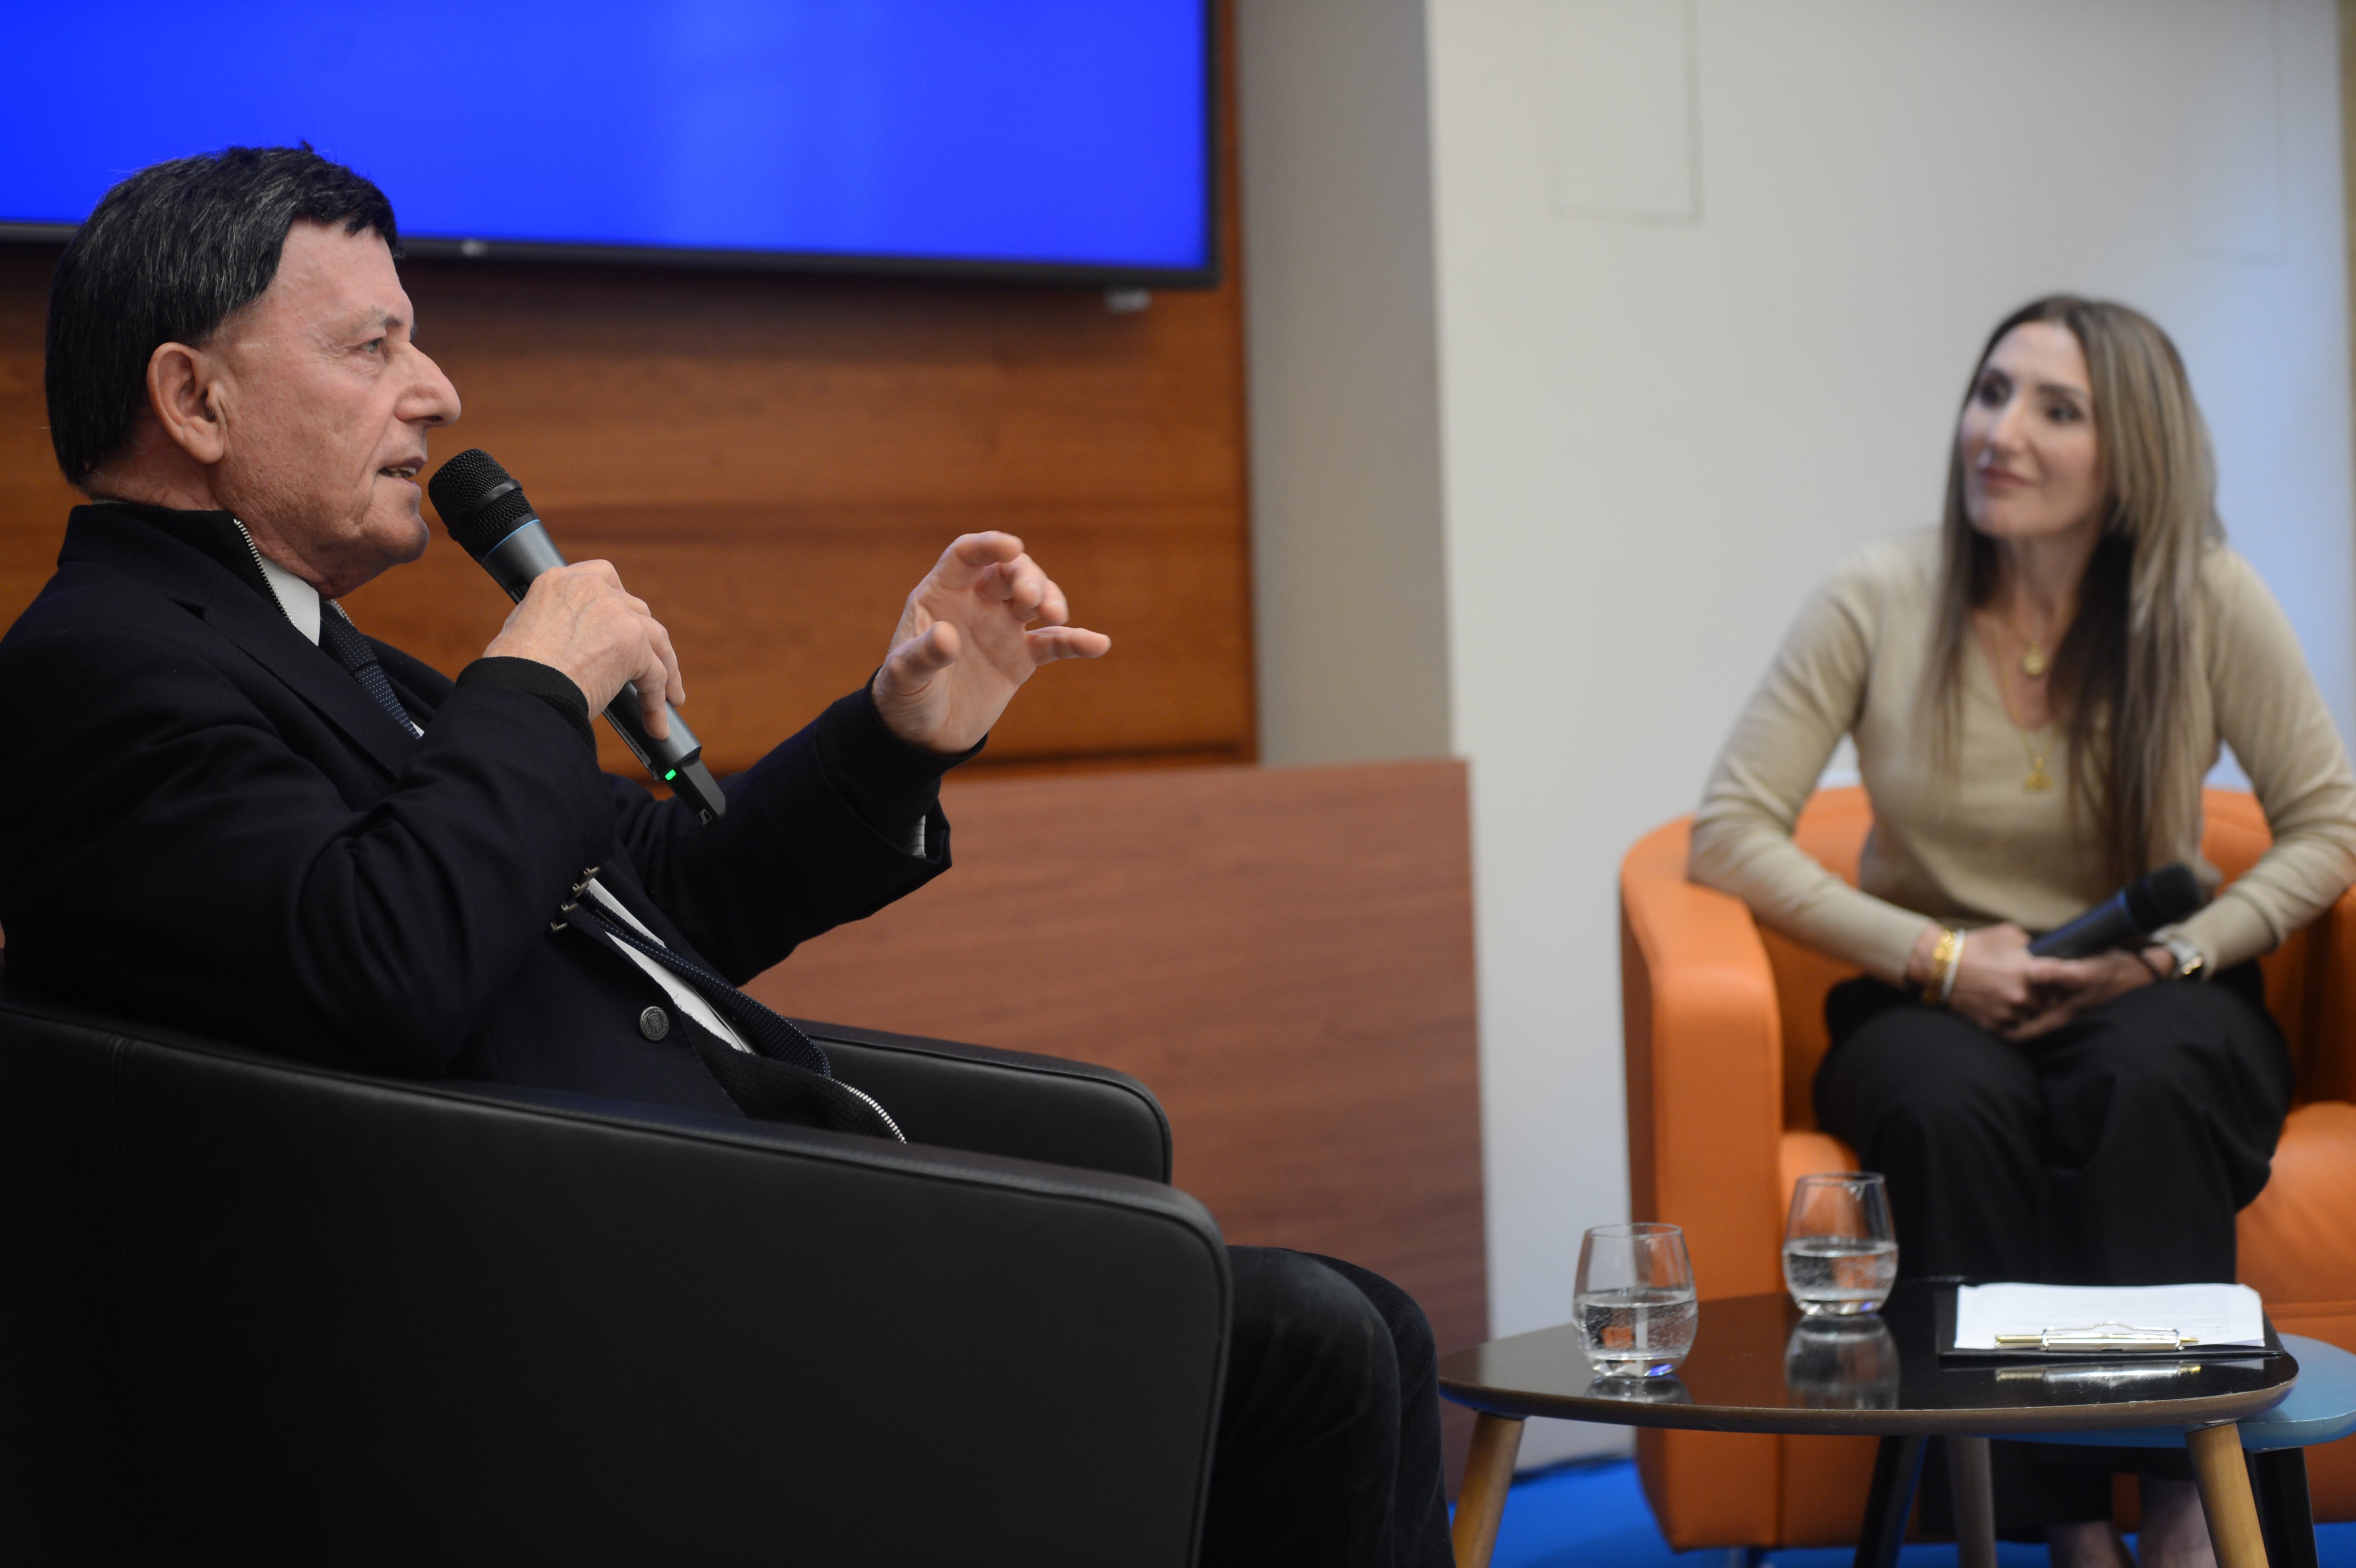 MEP Alfred Sant at the public discussion on "The Continental European Market" with Claire Agius Ordway at Europe House